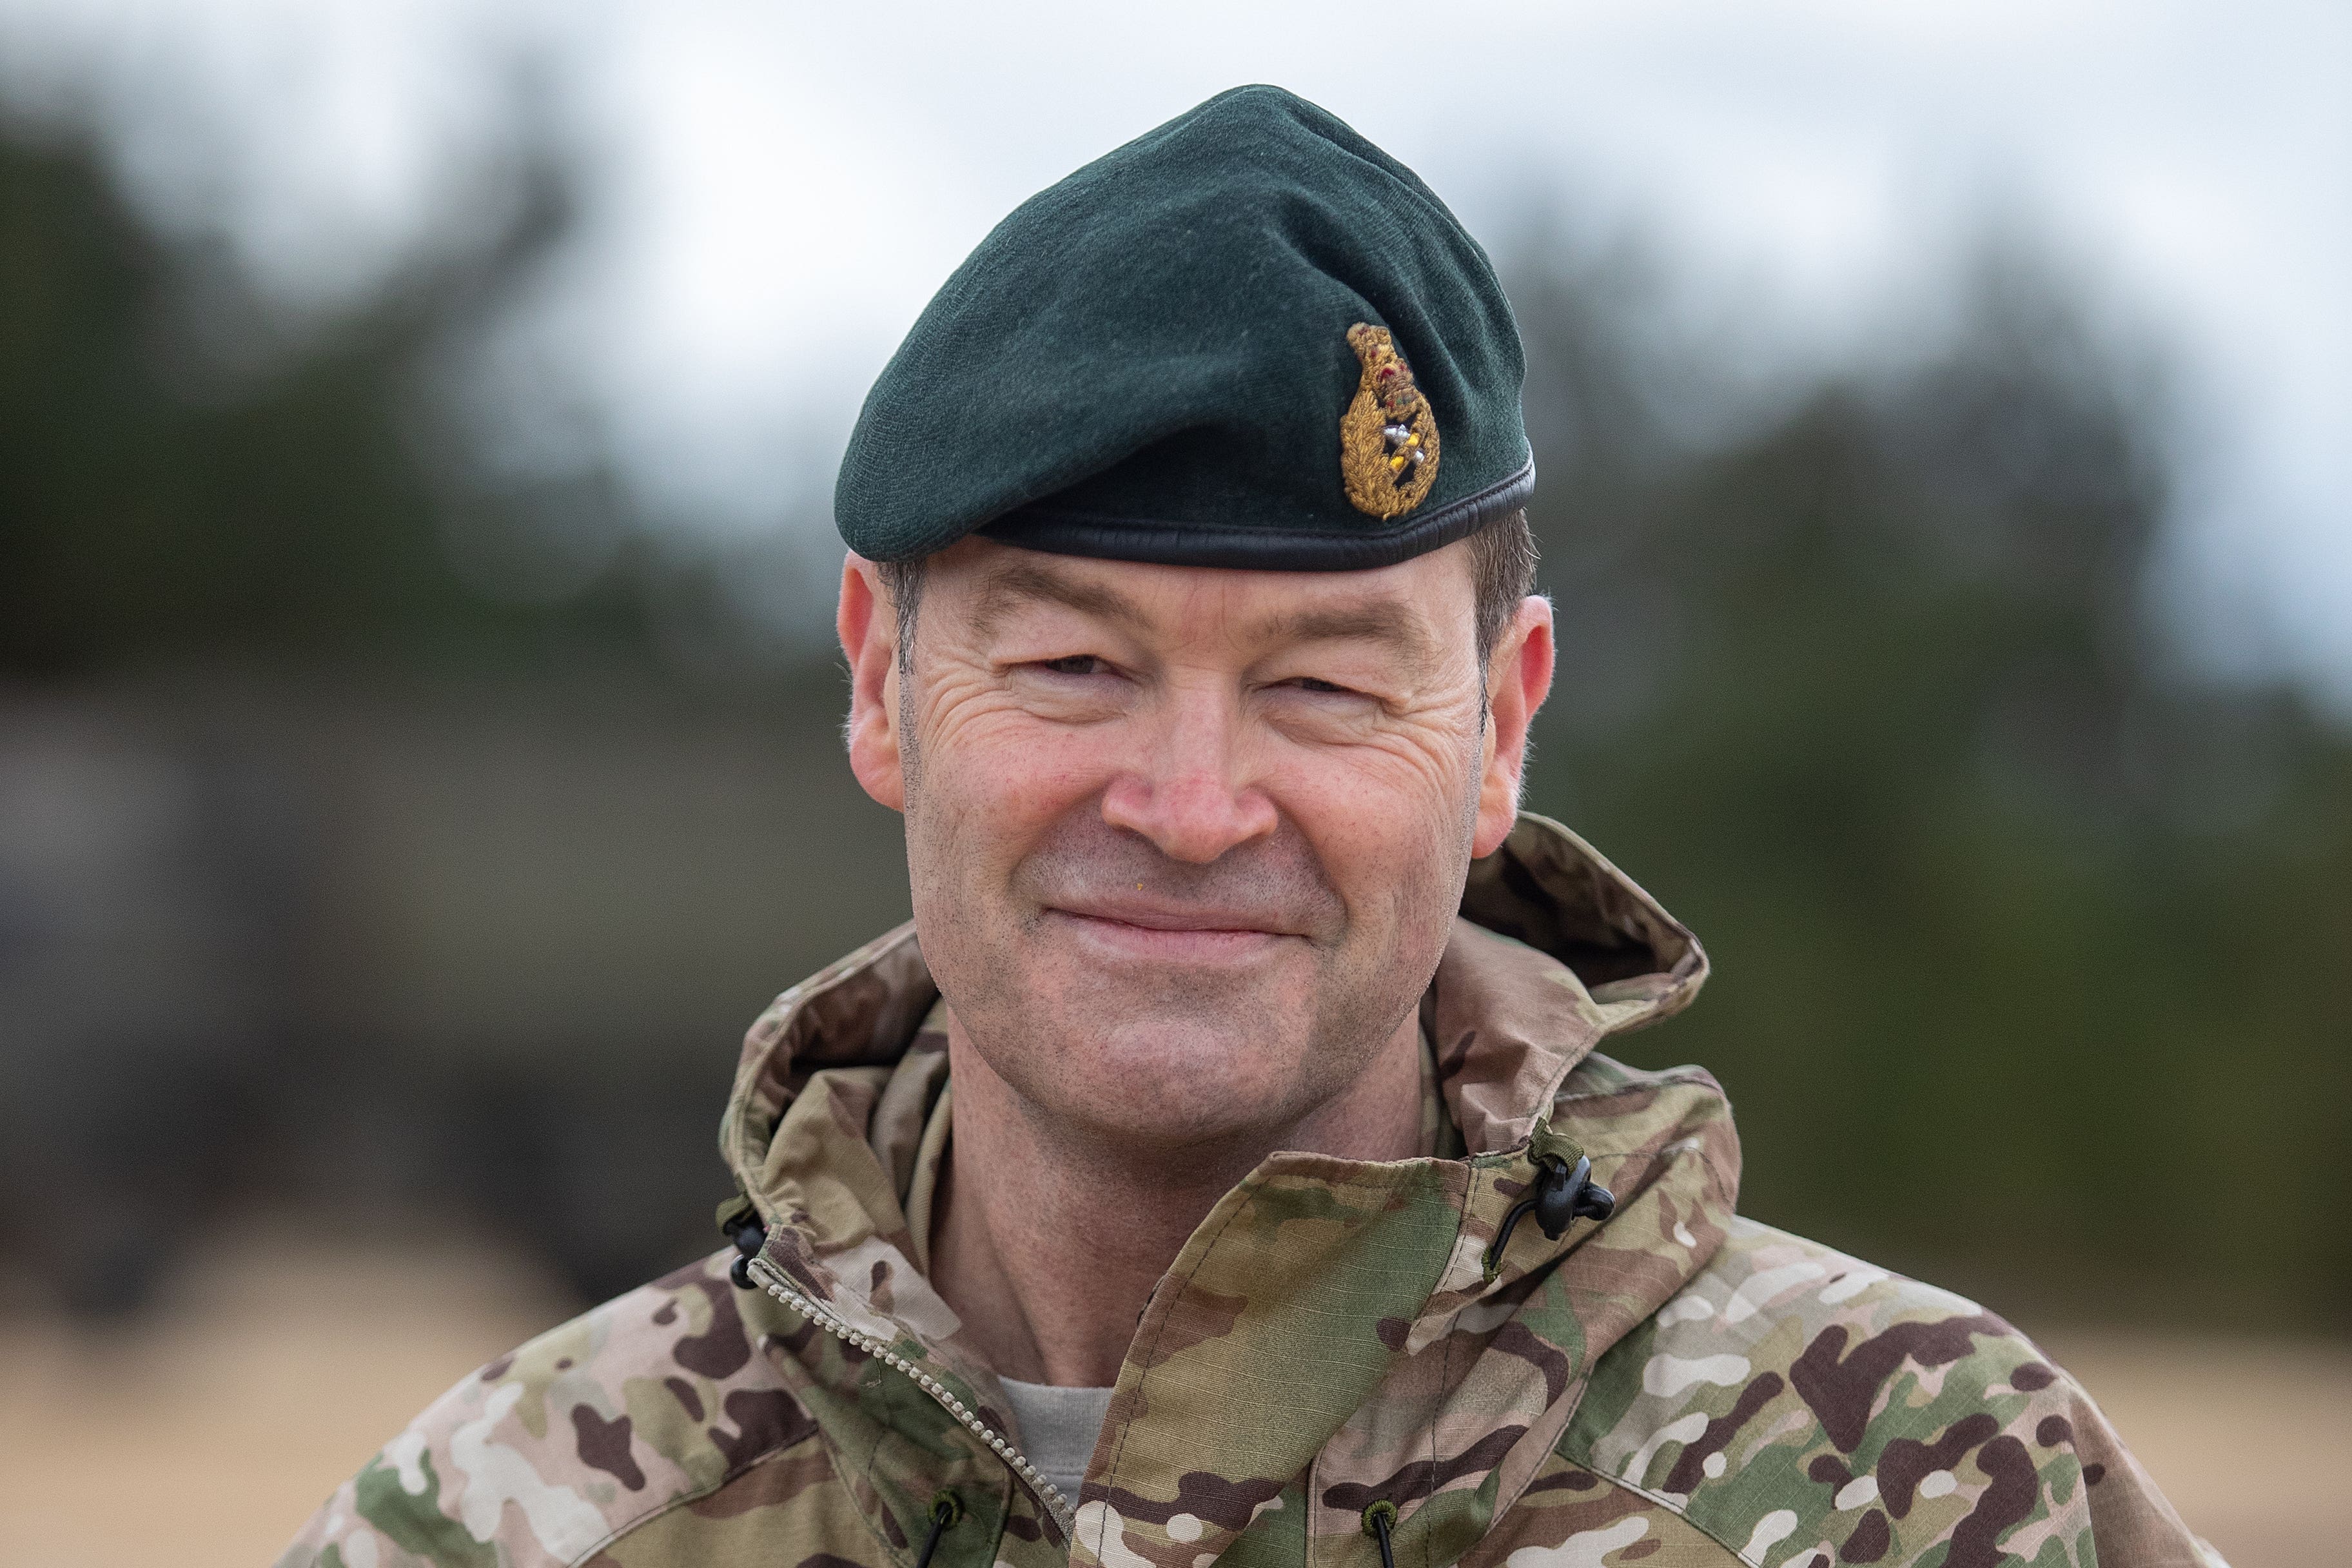 General Sir Patrick Sanders delivered his warning at the International Armoured Vehicles conference in southwest London on Wednesday